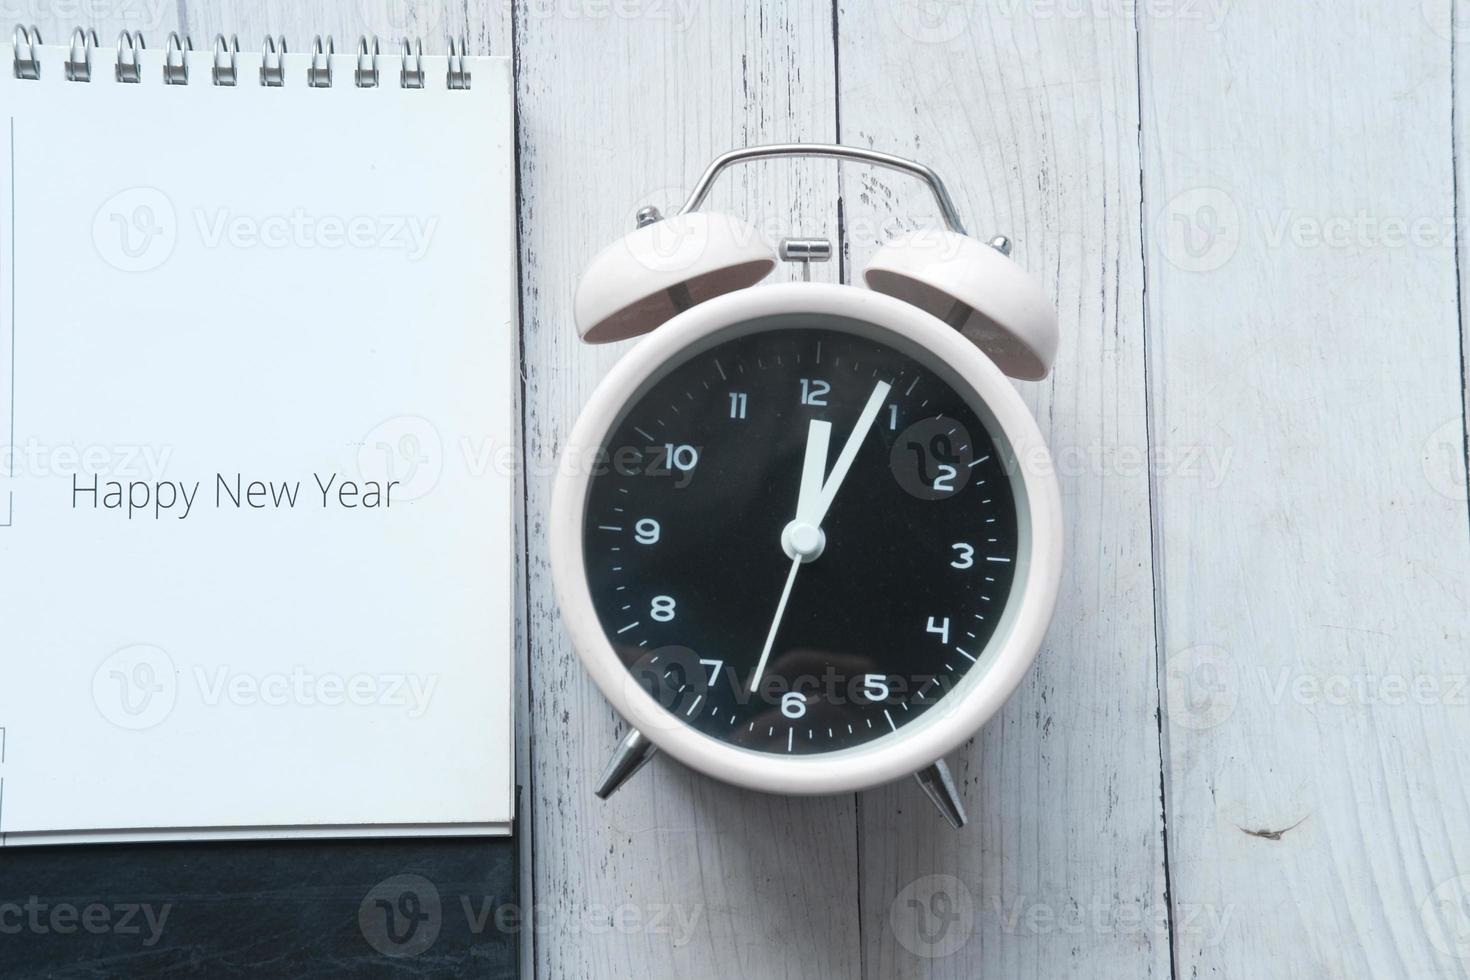 happy new year text on calendar with clock on table photo